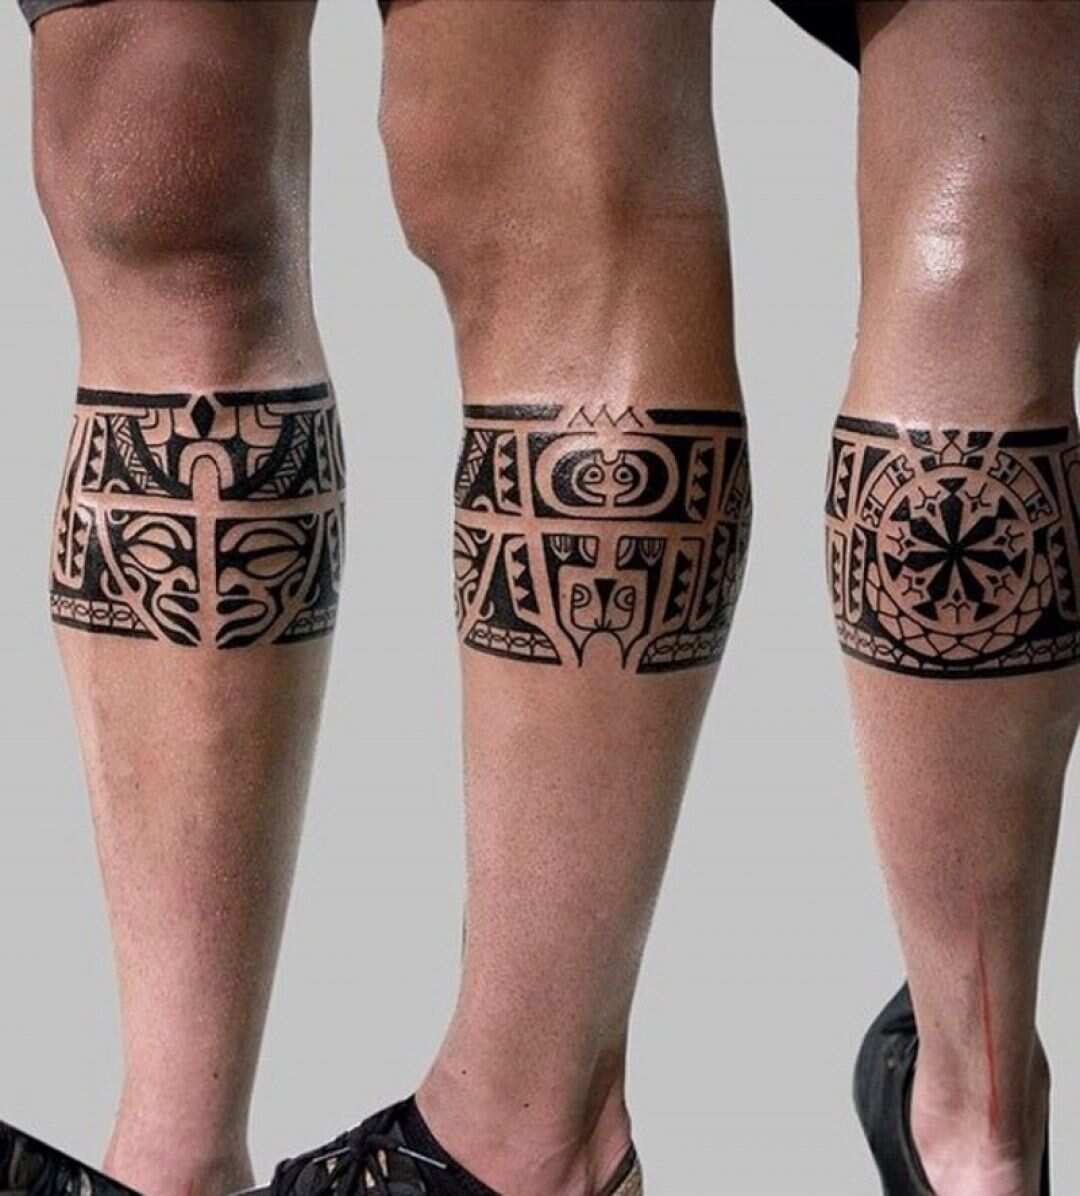 Top 15 Aztec Tattoo Designs With Meanings  Styles At Life